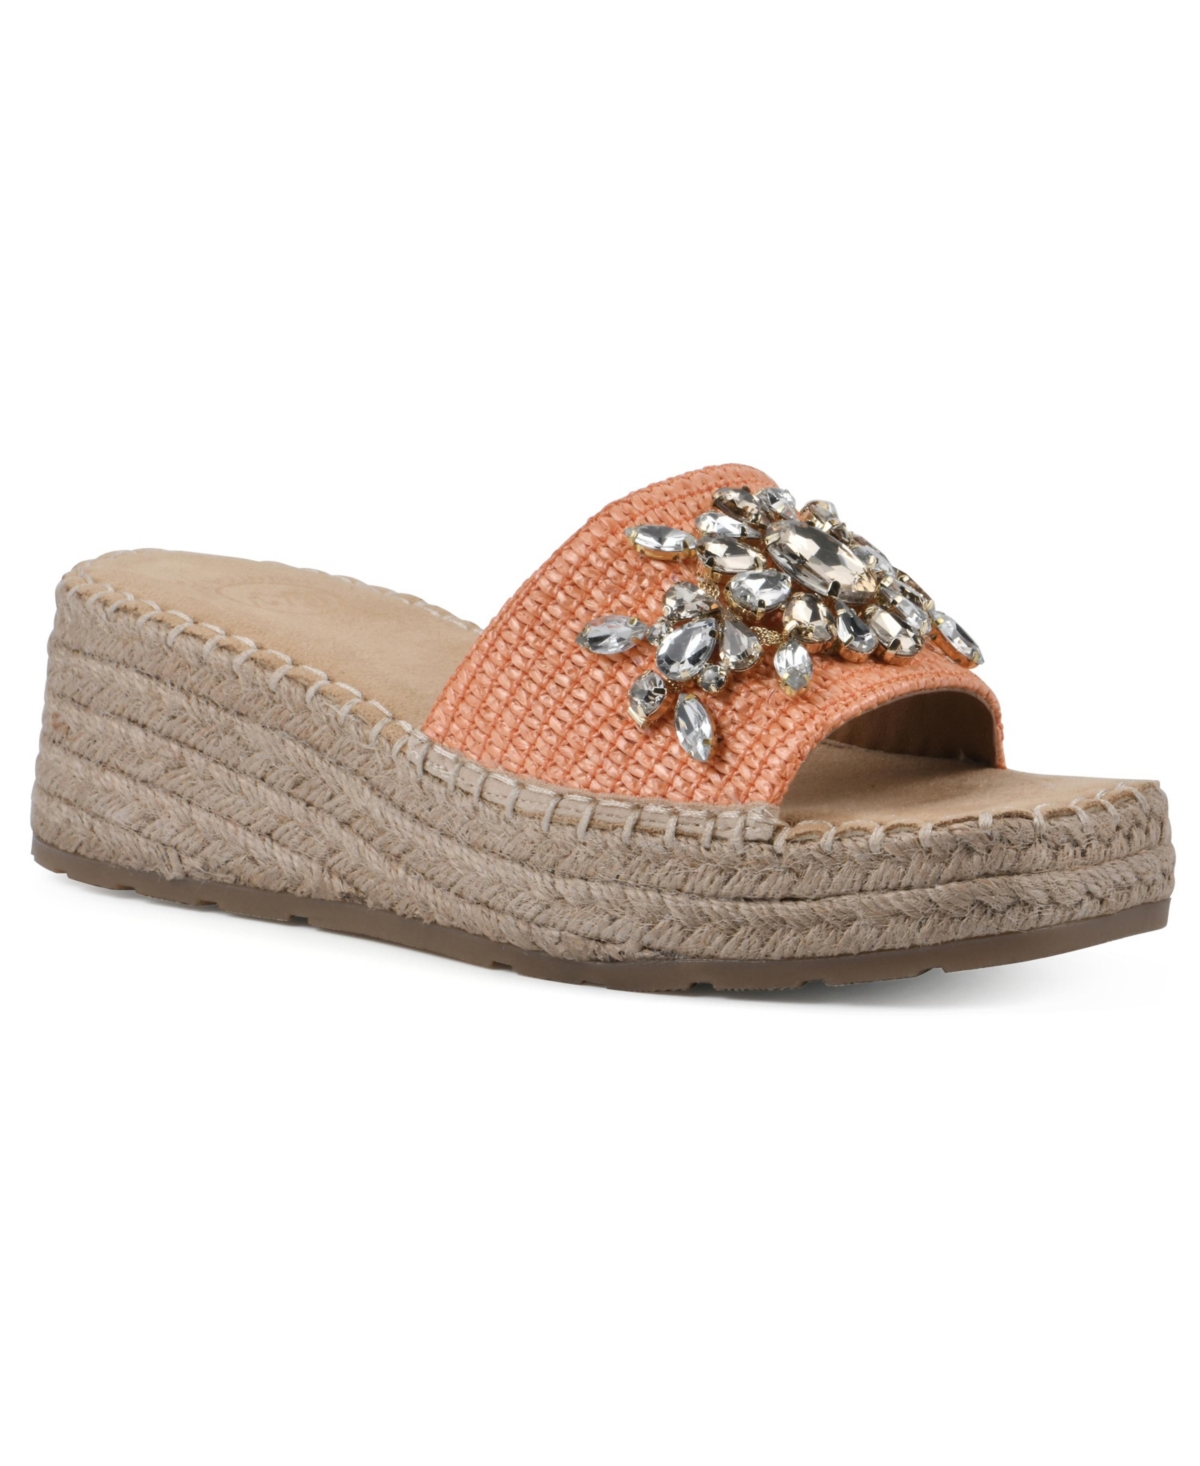 White Mountain Stitch Espadrille Wedge Sandals In Cantaloupe